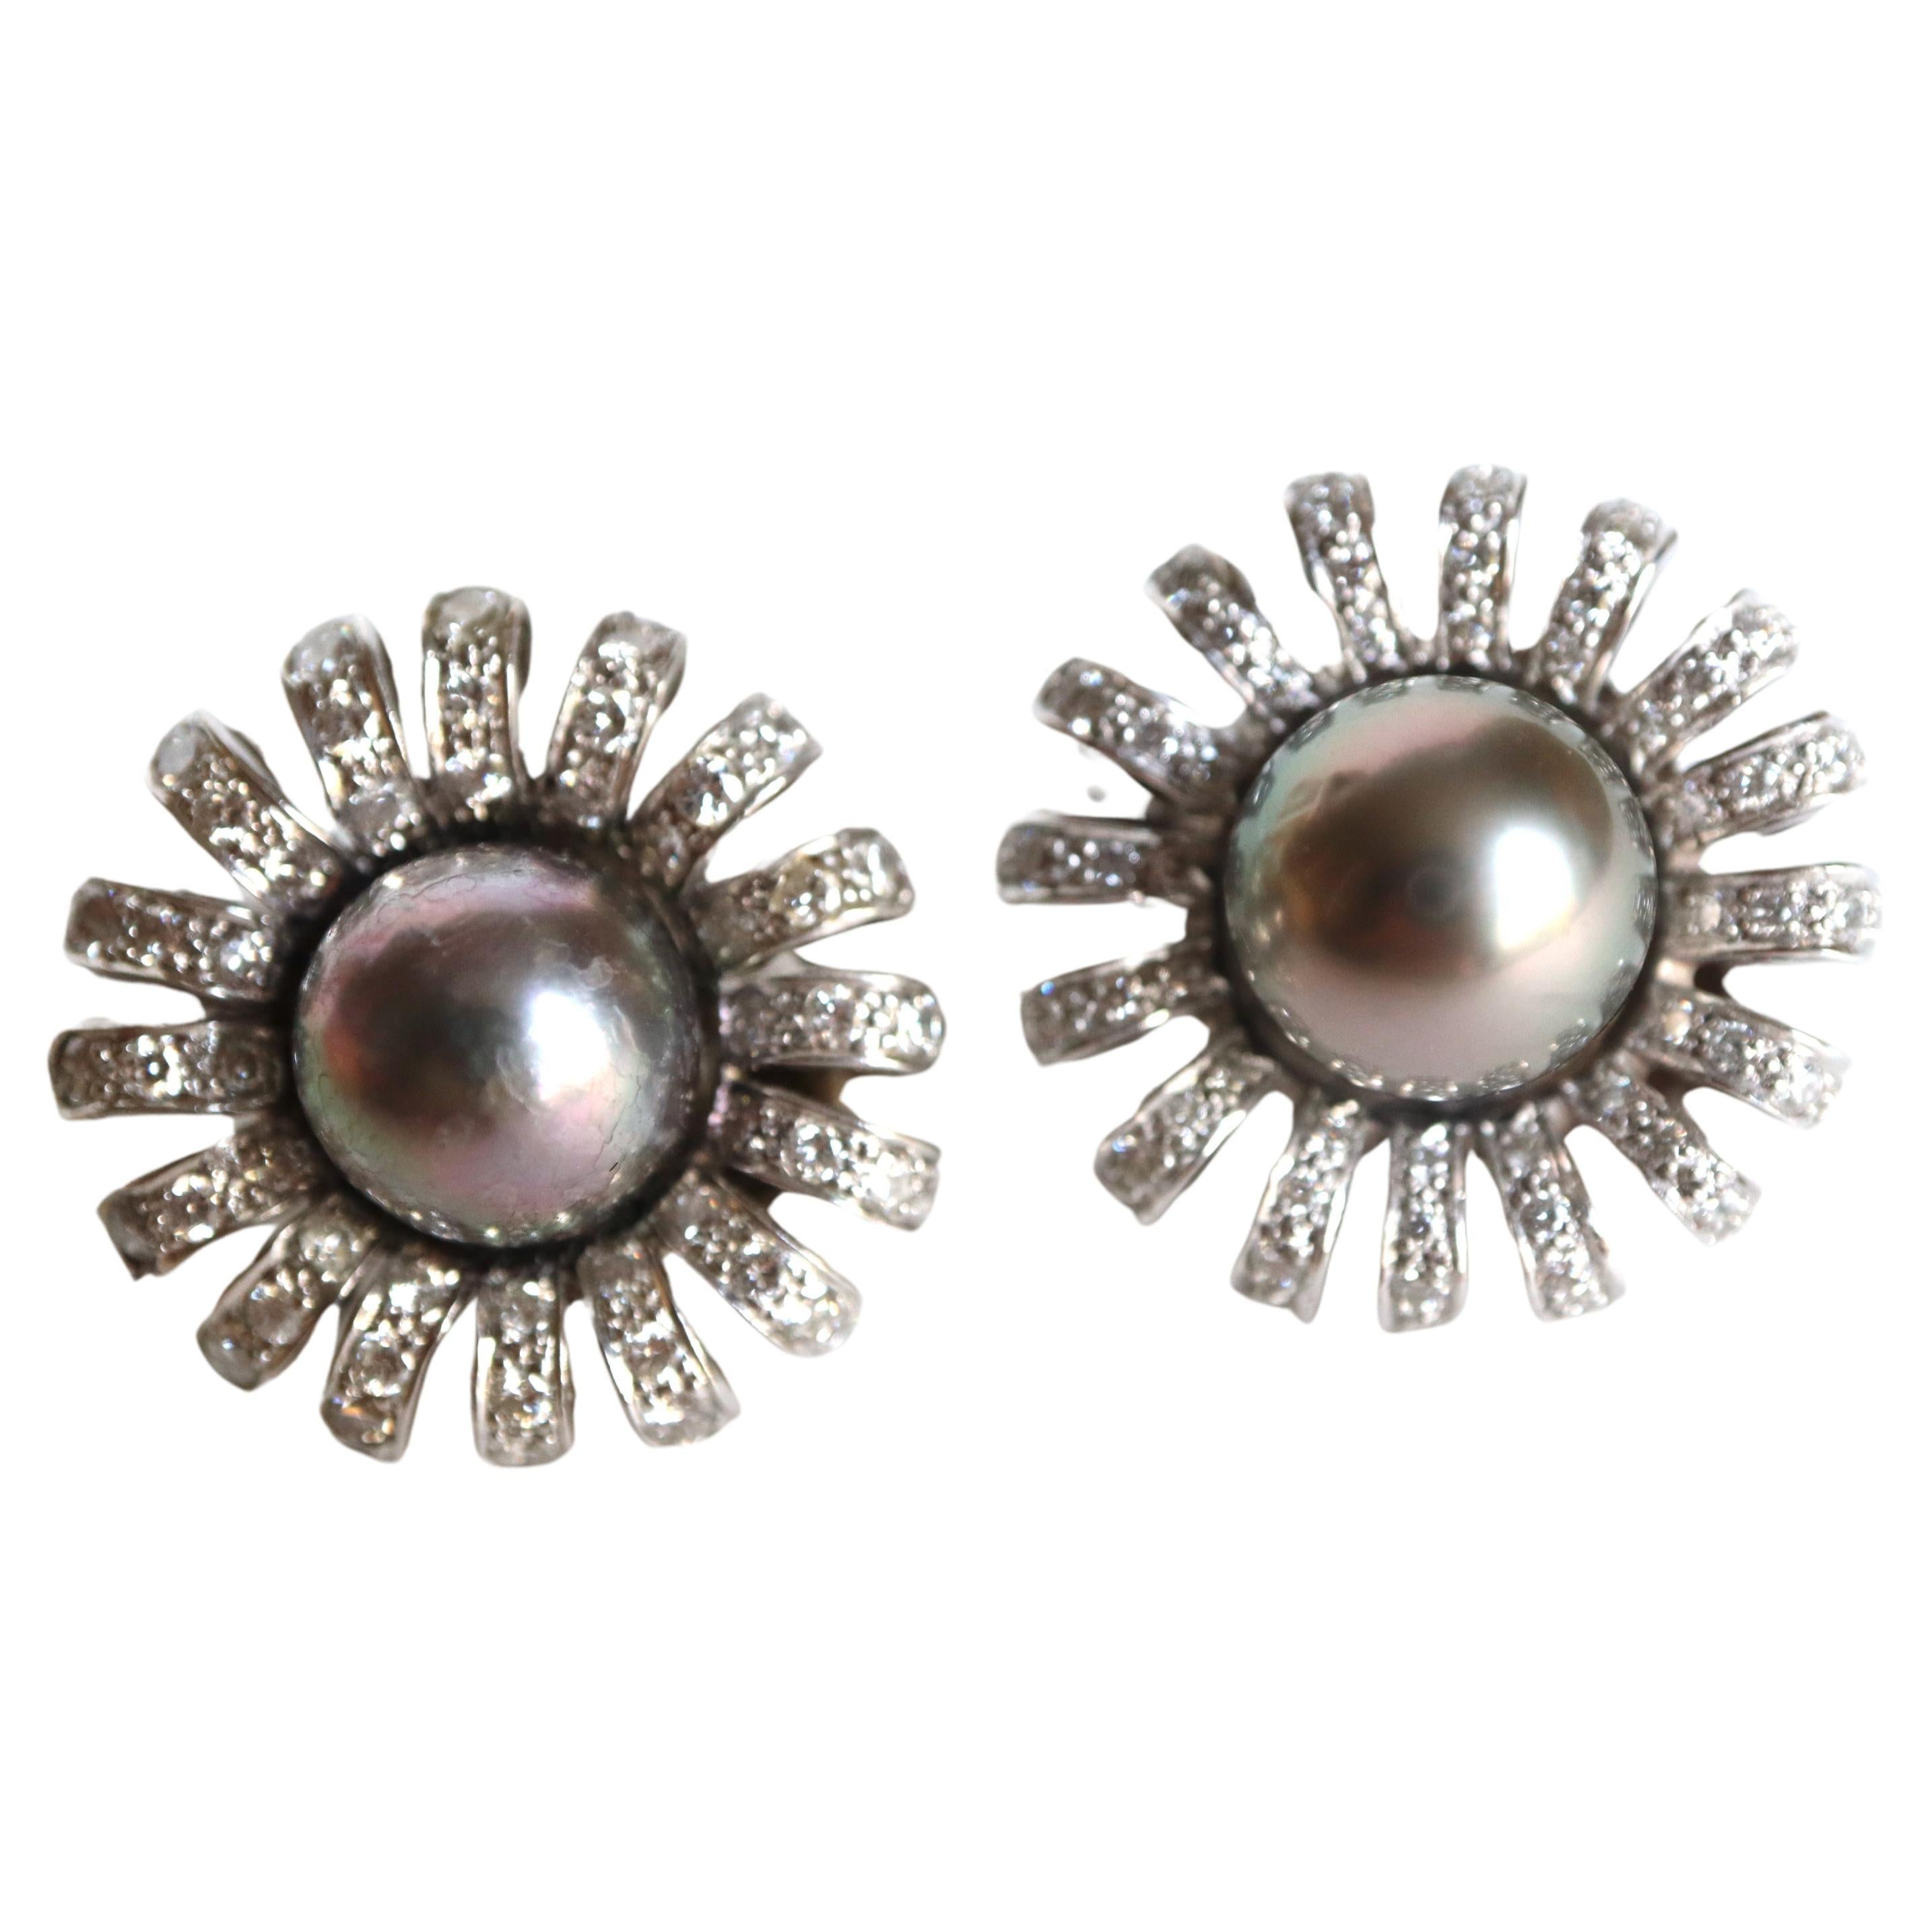 Black Pearls Earrings in 18 Carats White Gold and Diamonds